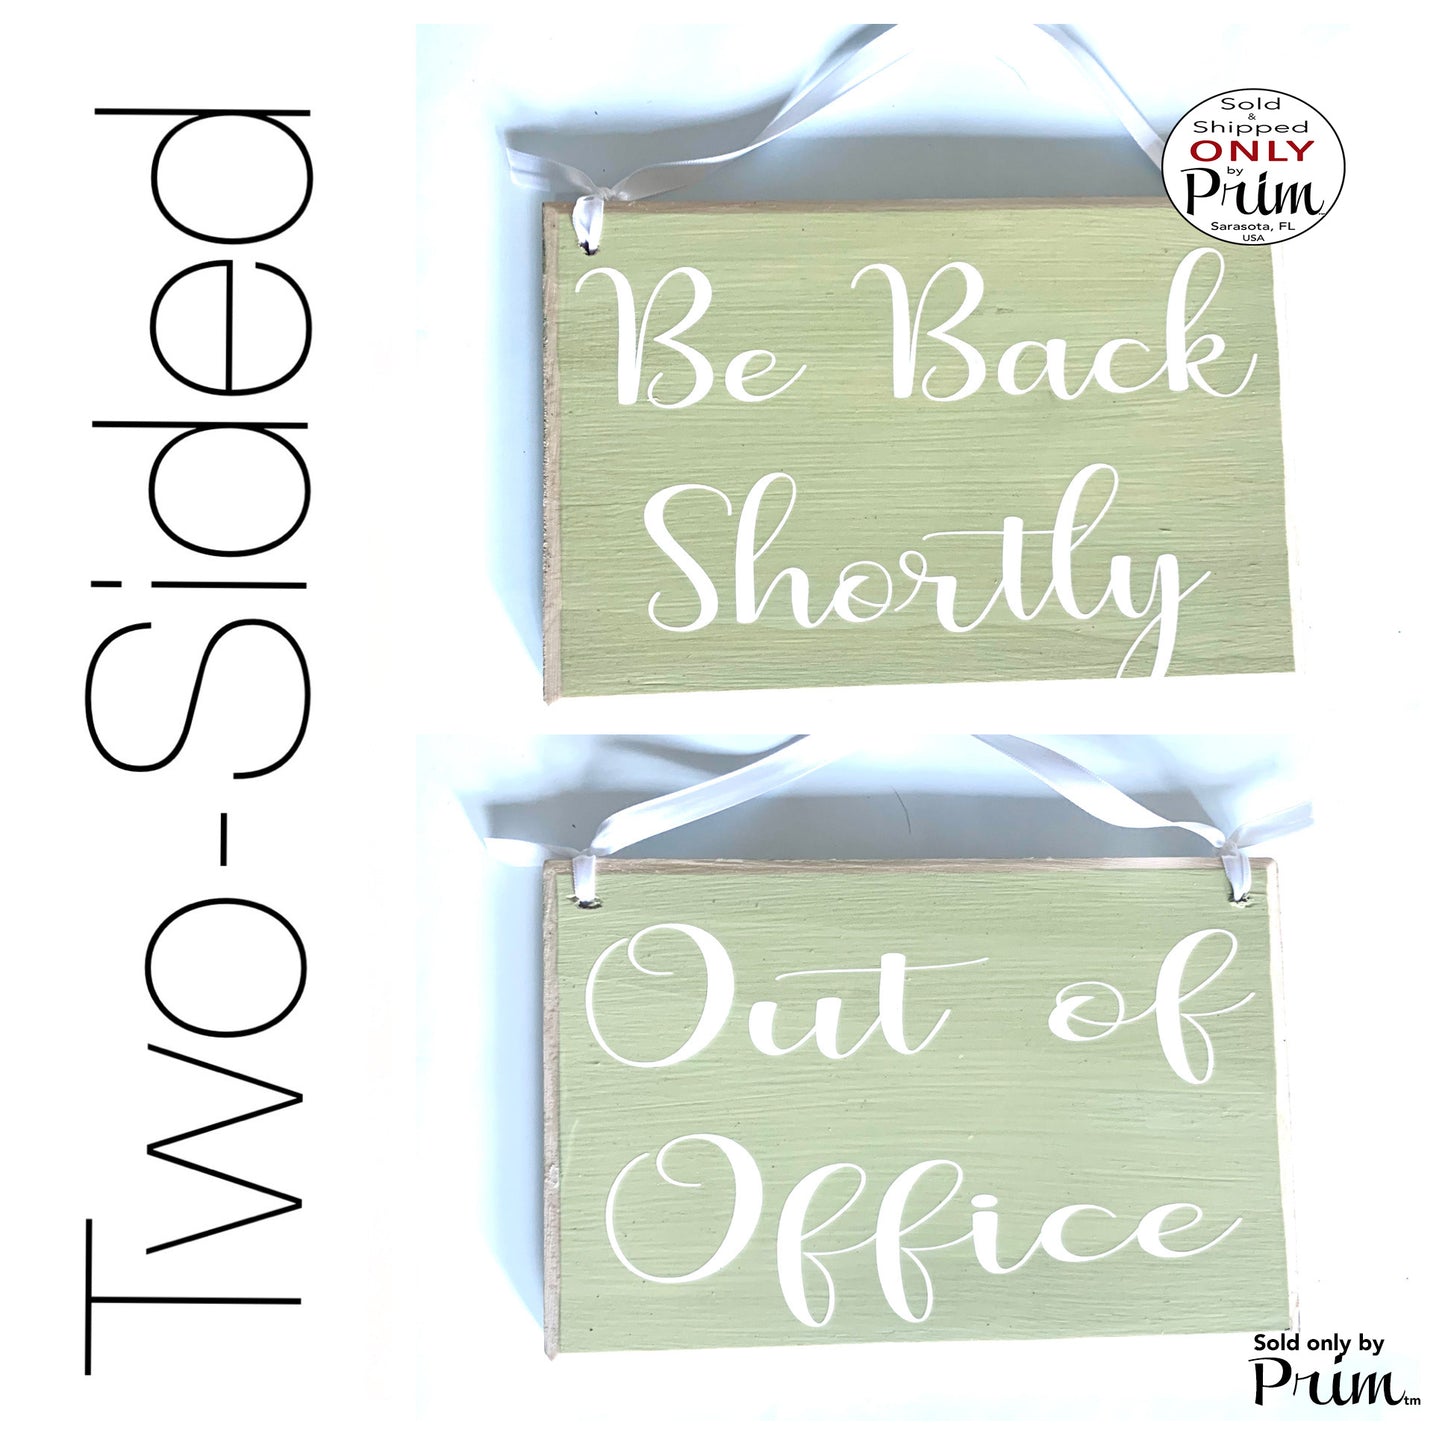 Designs by Prim Two Sided 8x6 Out of Office Be Back Shortly Custom Wood Sign Sorry We Missed You In Session Do Not Disturb Knock Office Door Hanger Plaque